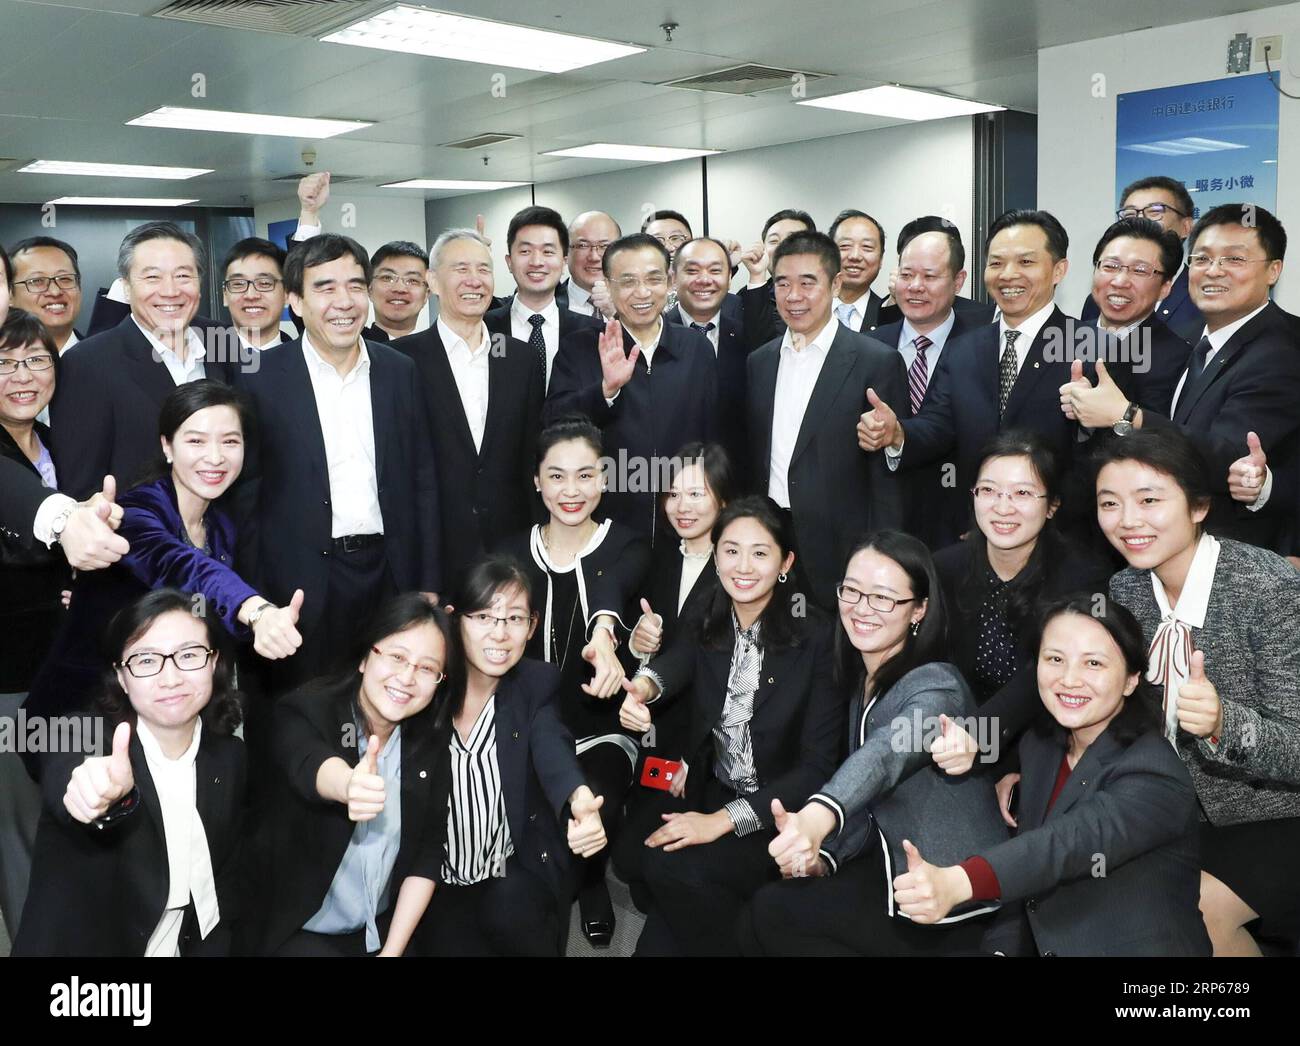 (190104) -- BEIJING, Jan. 4, 2019 -- Chinese Premier Li Keqiang poses for a group photo with staff members during his visit to China Construction Bank in Beijing, capital of China, Jan. 4, 2019. Li Keqiang paid a visit to Bank of China, Industrial and Commercial Bank of China, and China Construction Bank on Friday. Li also held a meeting at the China Banking and Insurance Regulatory Commission after the visit. ) CHINA-BEIJING-LI KEQIANG-ECONOMY-BANK-VISIT-MEETING (CN) PangxXinglei PUBLICATIONxNOTxINxCHN Stock Photo